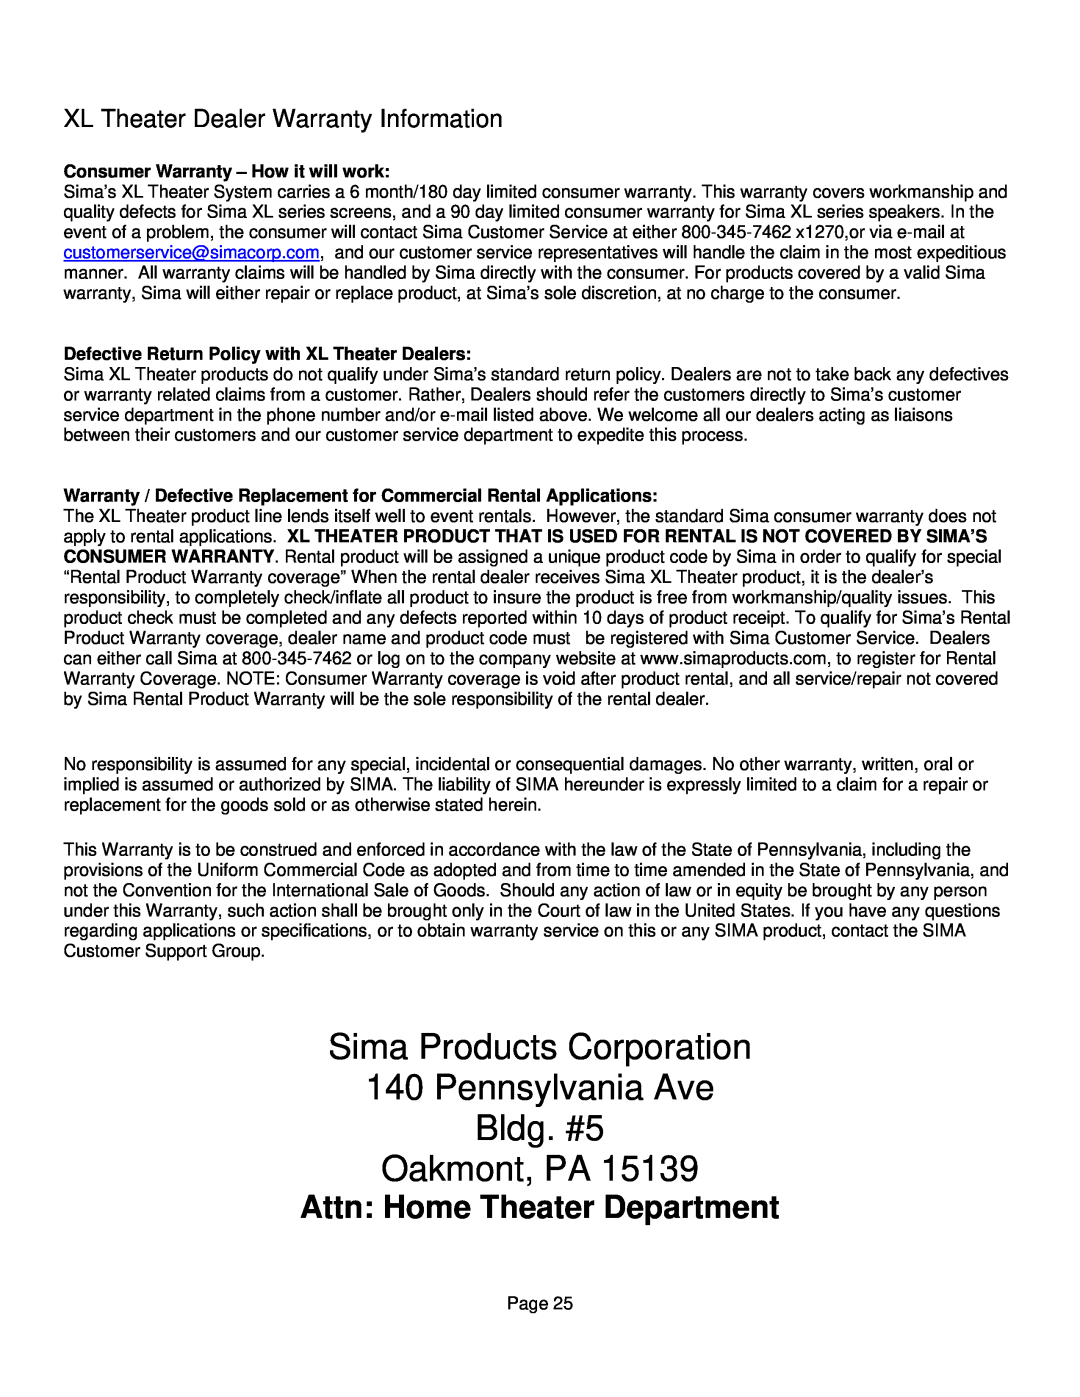 Sima Products XL-12 Sima Products Corporation 140 Pennsylvania Ave, Bldg. #5 Oakmont, PA, Attn Home Theater Department 